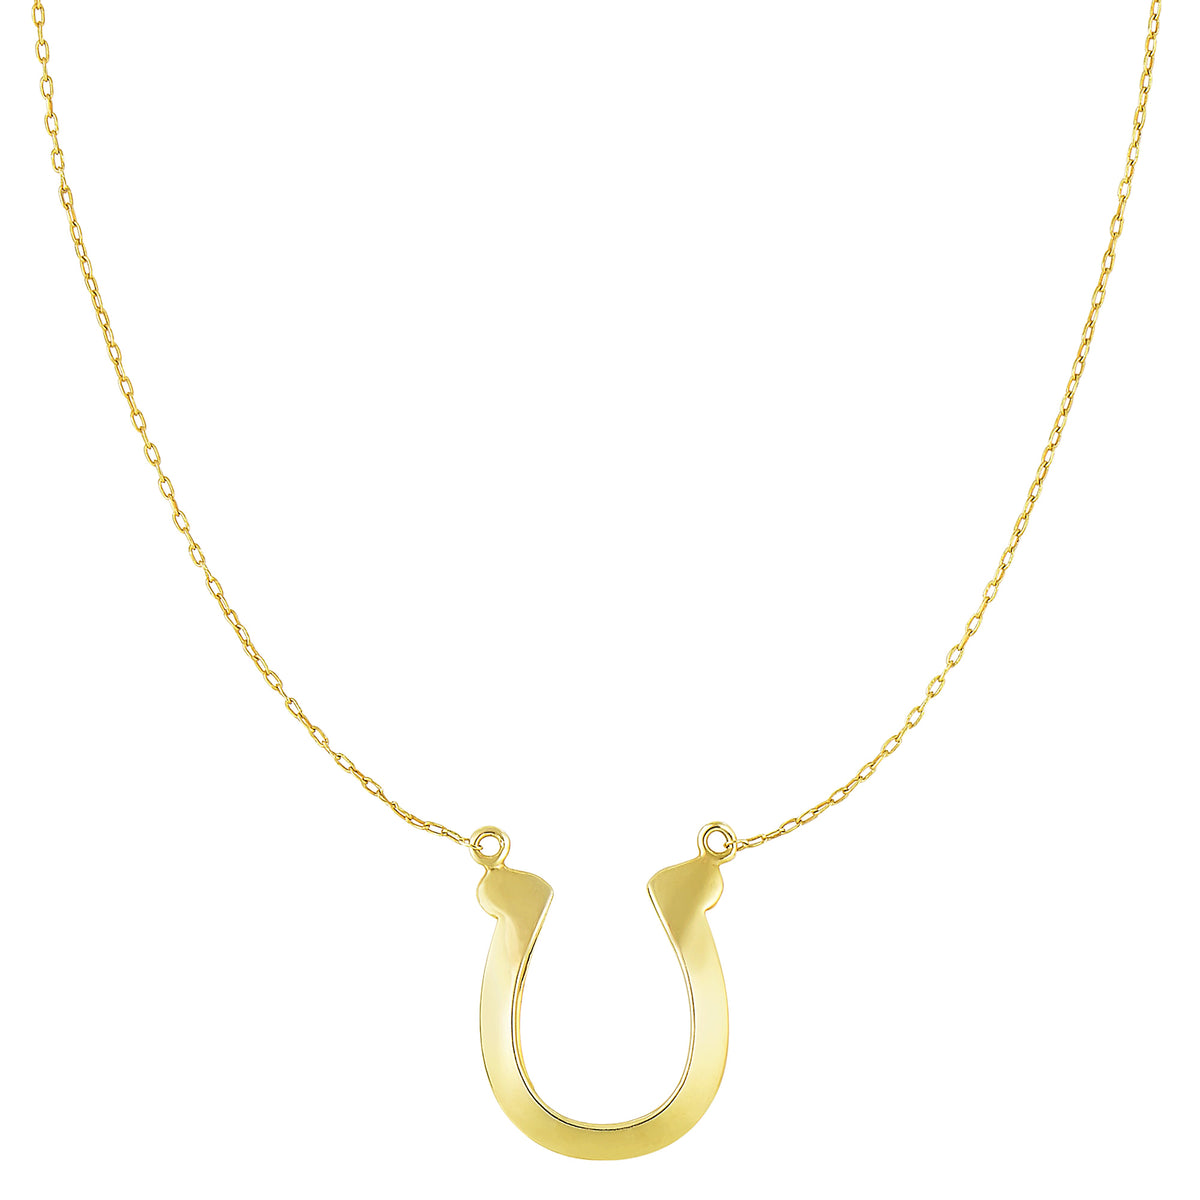 14k Yellow Gold Shiny Lucky Horse Shoe Pendant Necklace, 18" fine designer jewelry for men and women